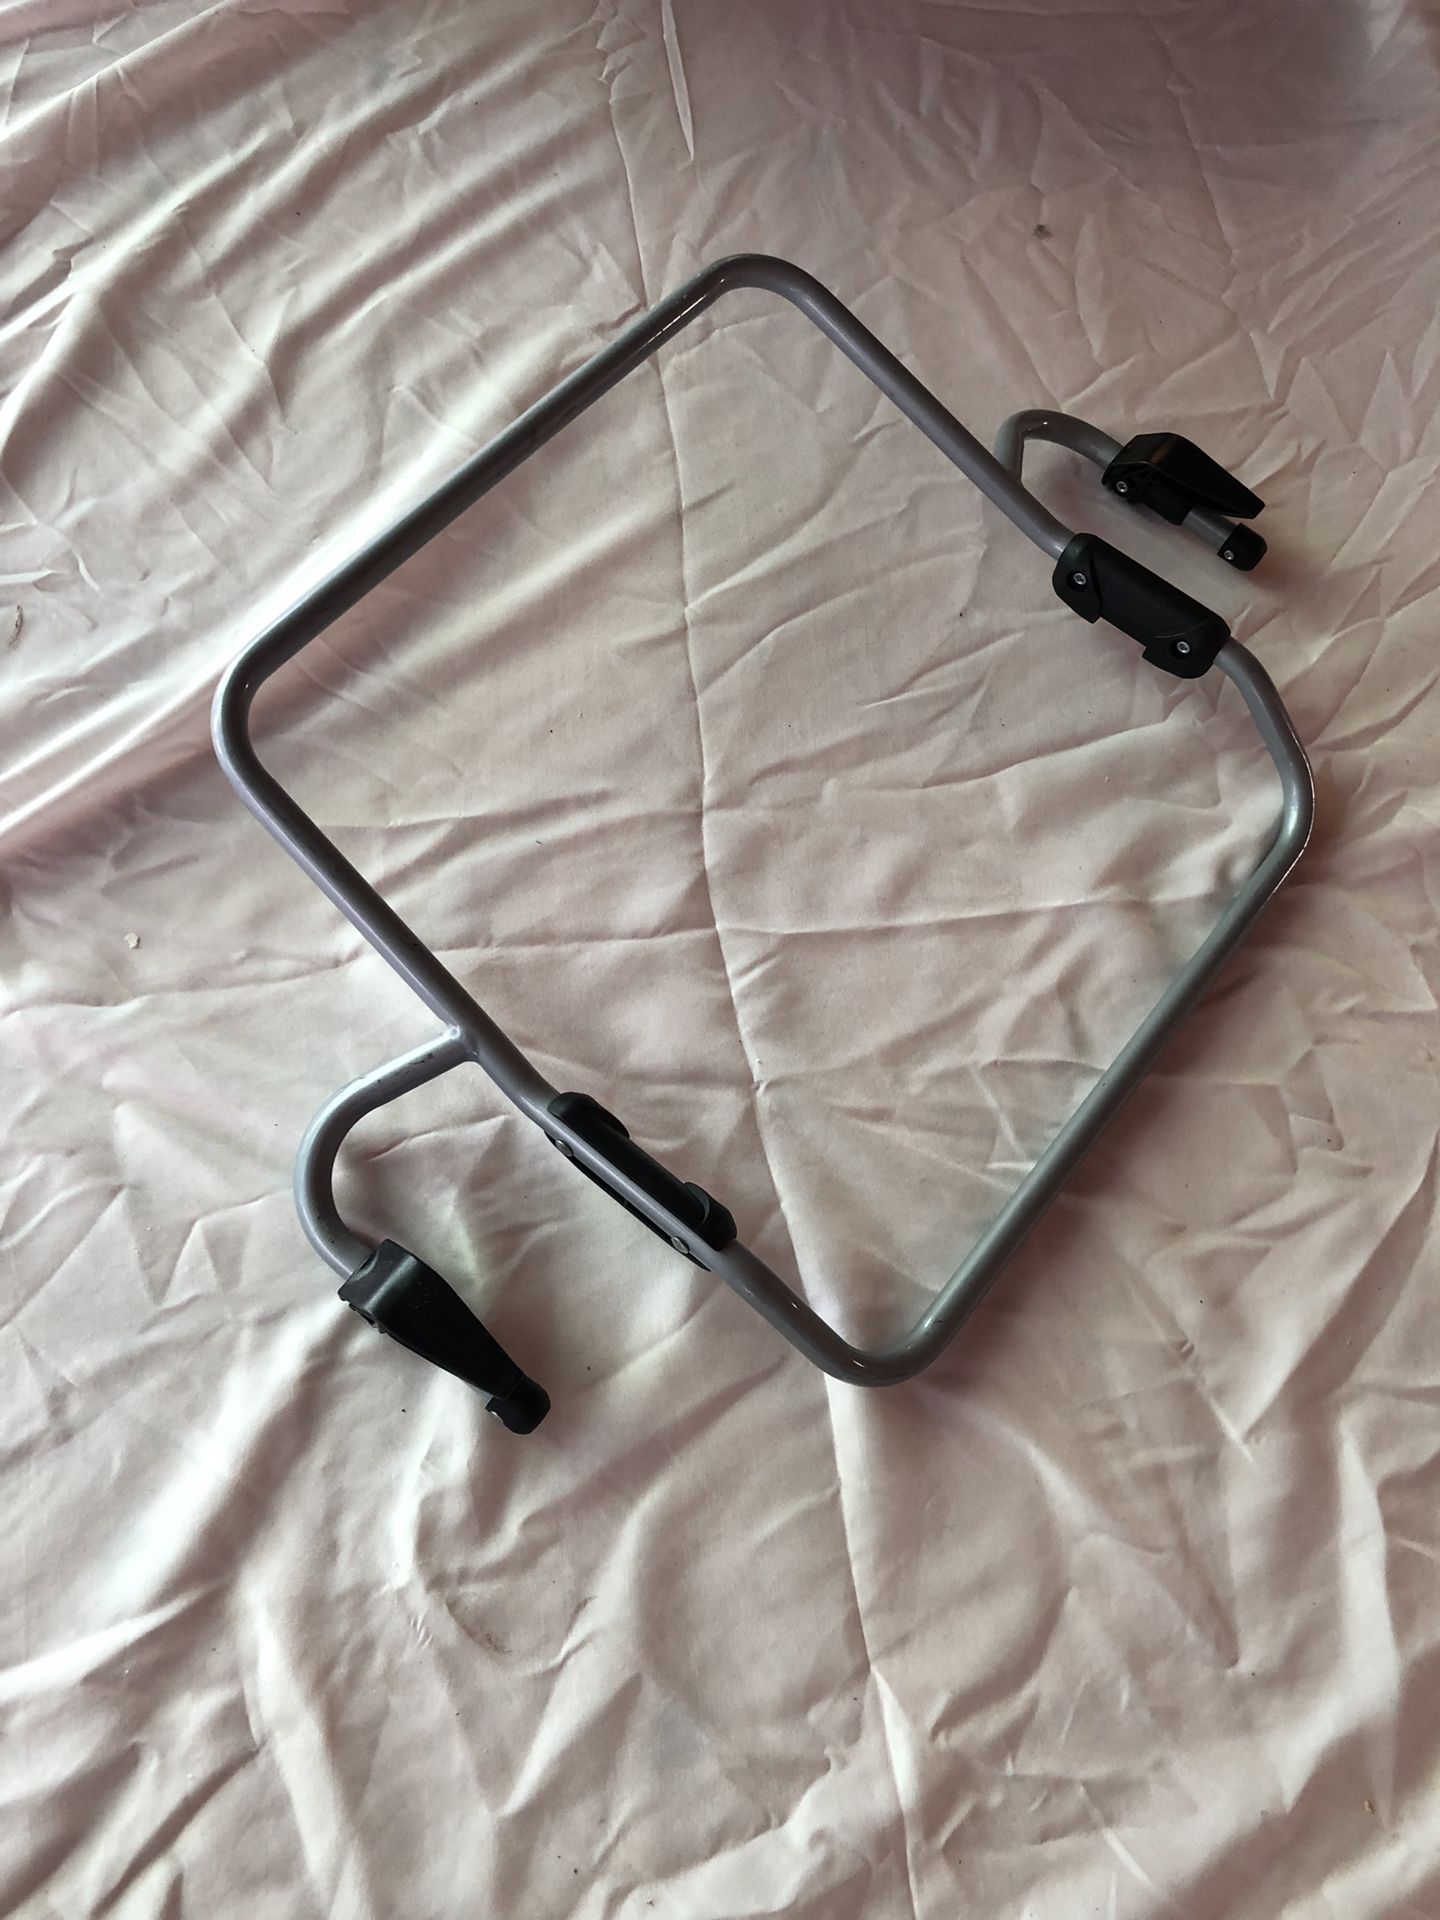 Bob stroller car seat adapter for a graco car seat